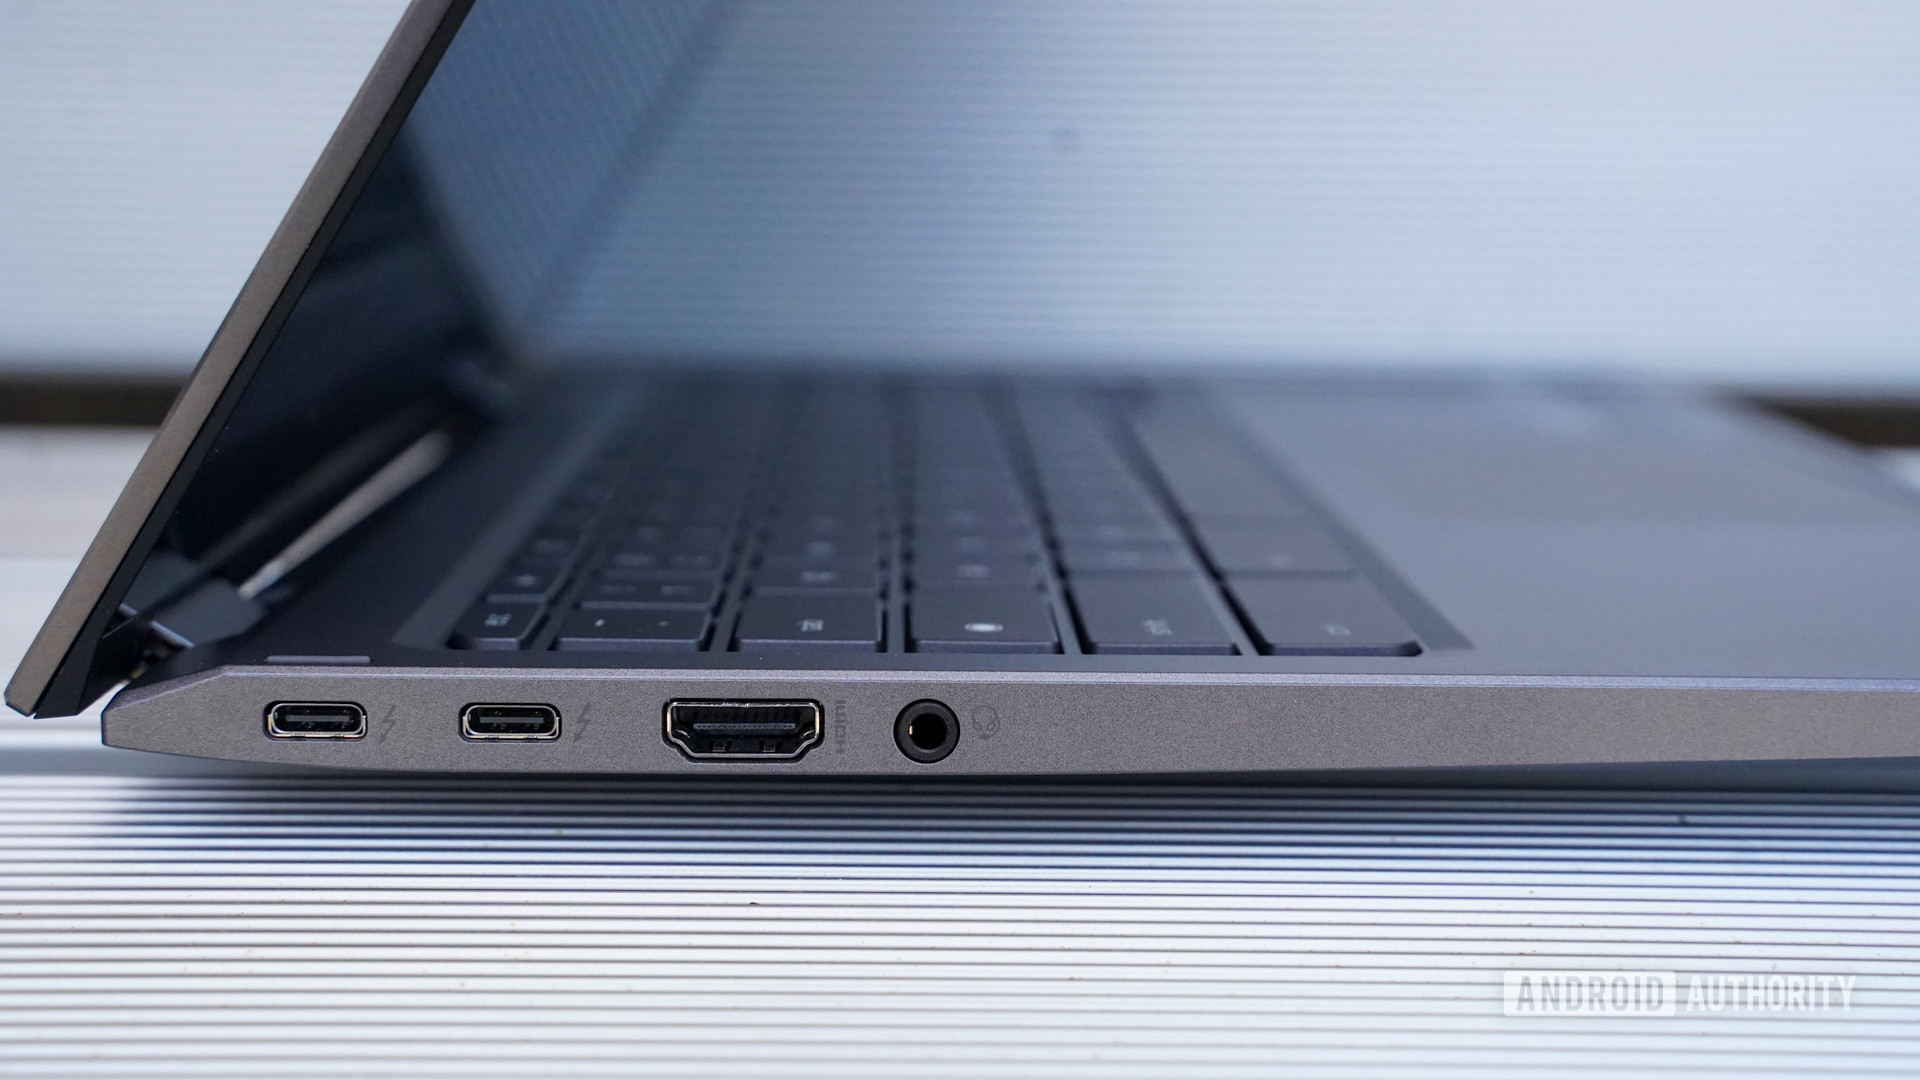 The Acer Chromebook Spin 713 side view showing the left ports.